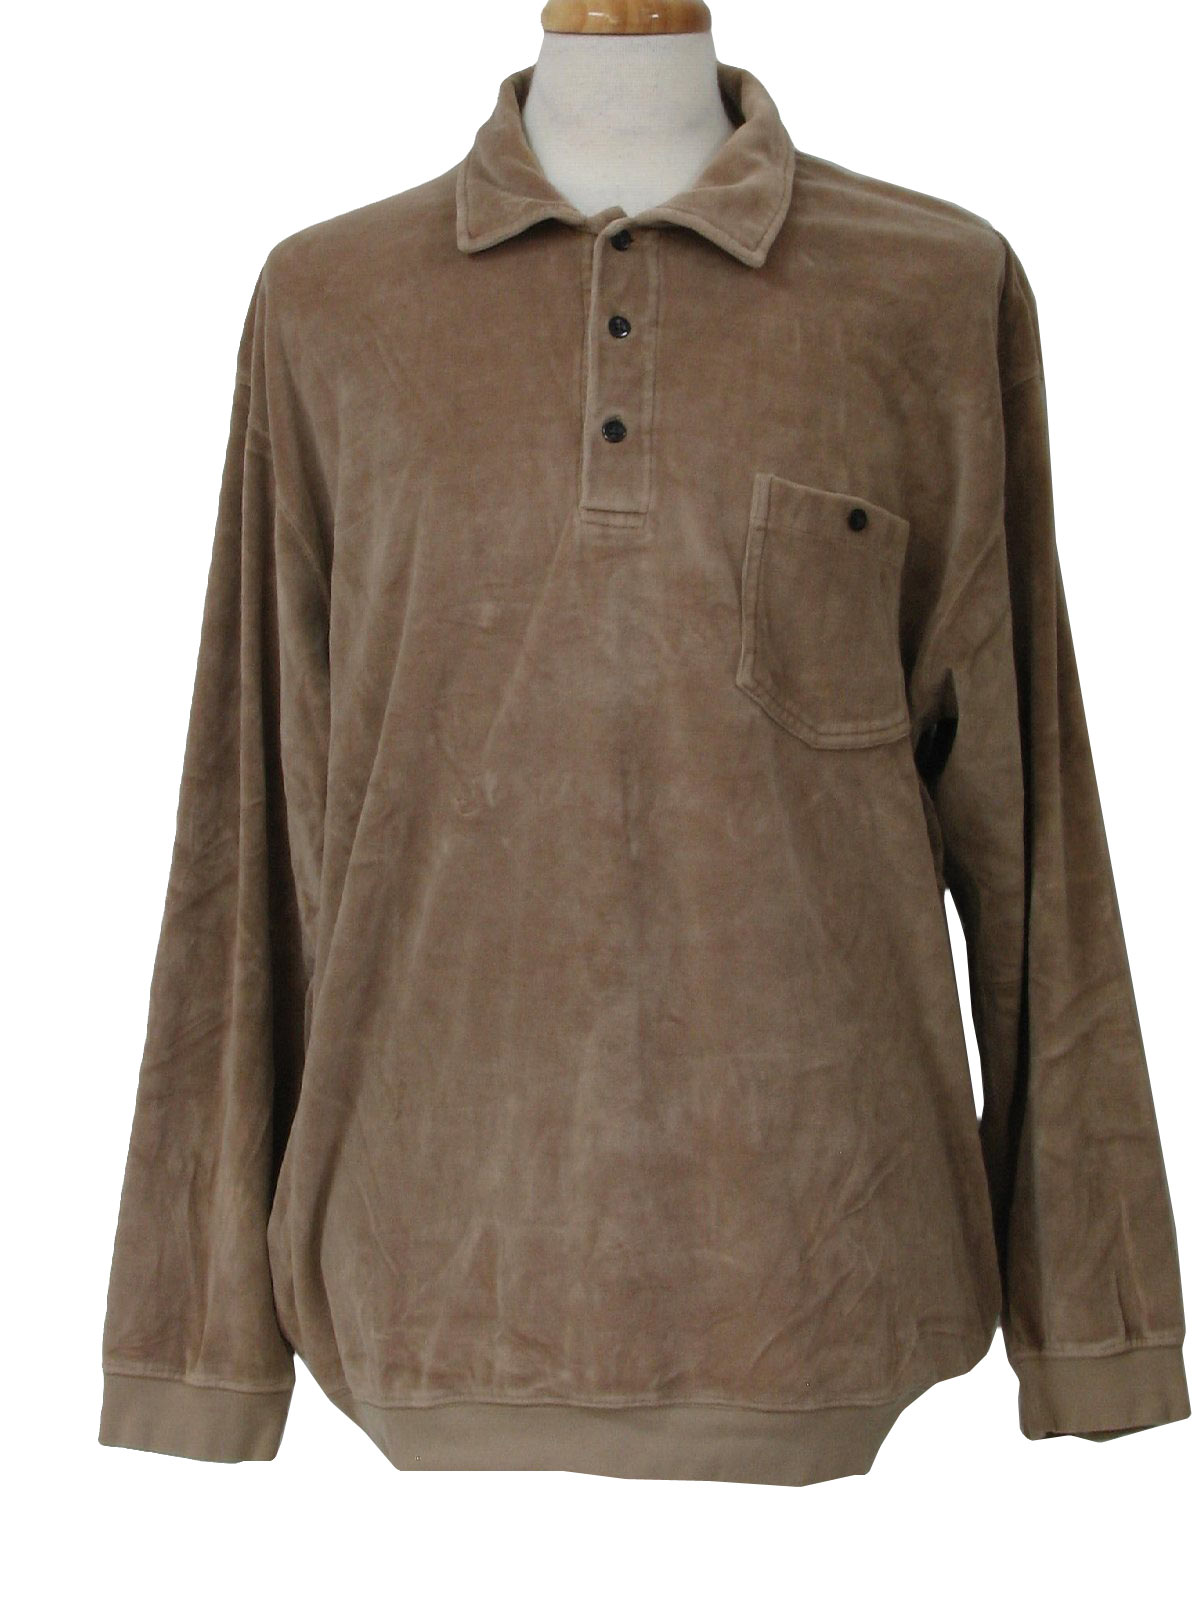 Vintage 1980's Velour Shirt: 80s -No Label- Mens taupe long sleeve ...